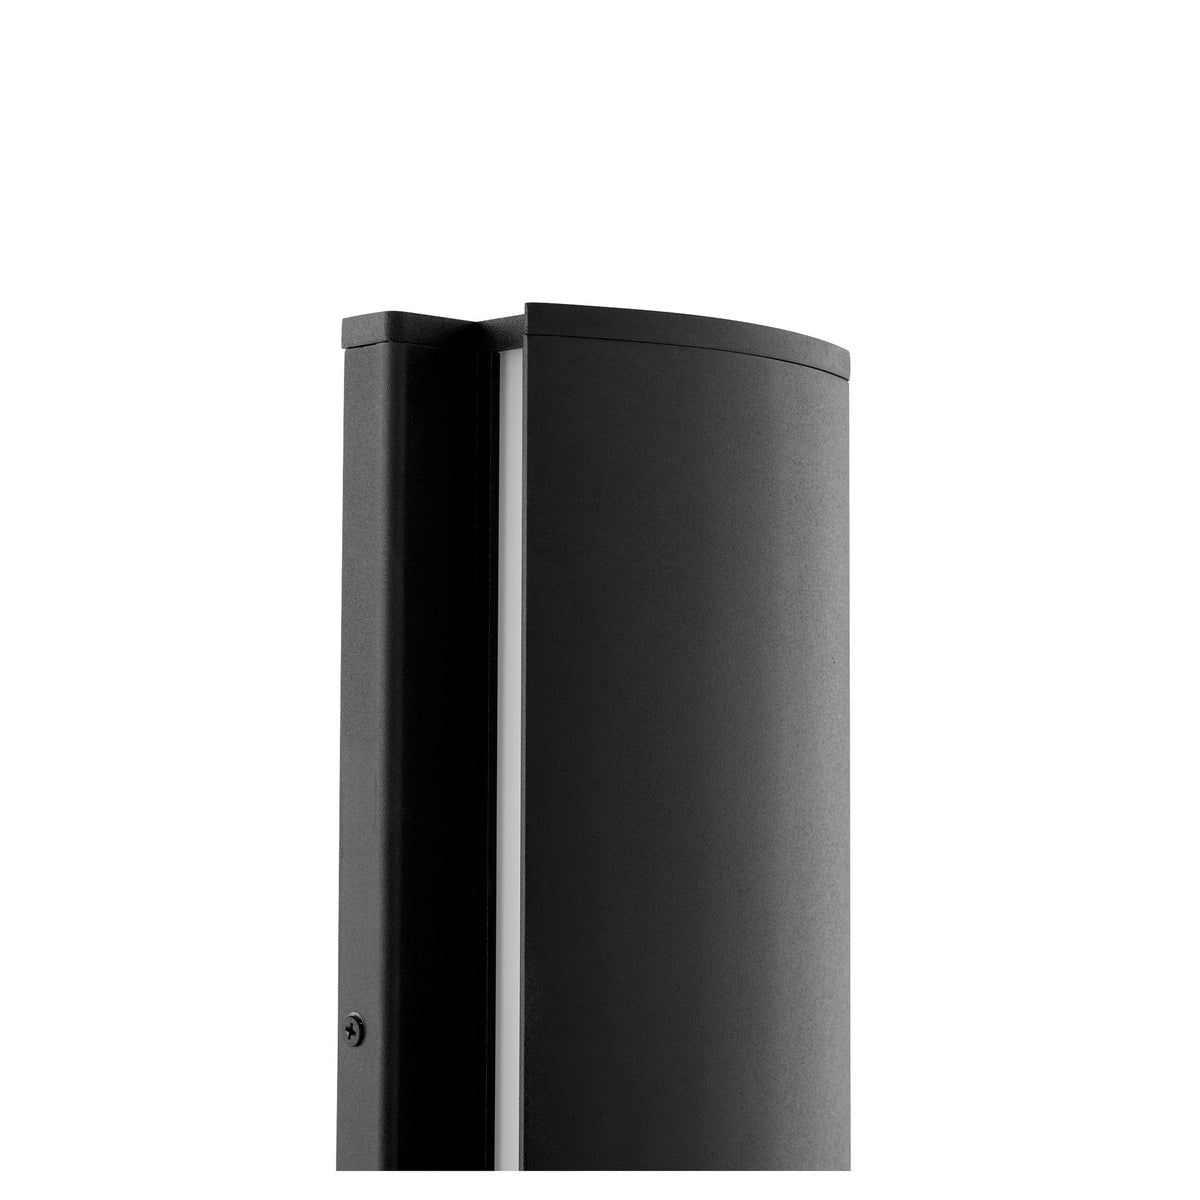 Outdoor LED Sconce, a black rectangular object with a white border. Produces bright, mellow radiance. Inconspicuous, dark monochrome exterior stain. 6"W x 20"H x 2.75"E.